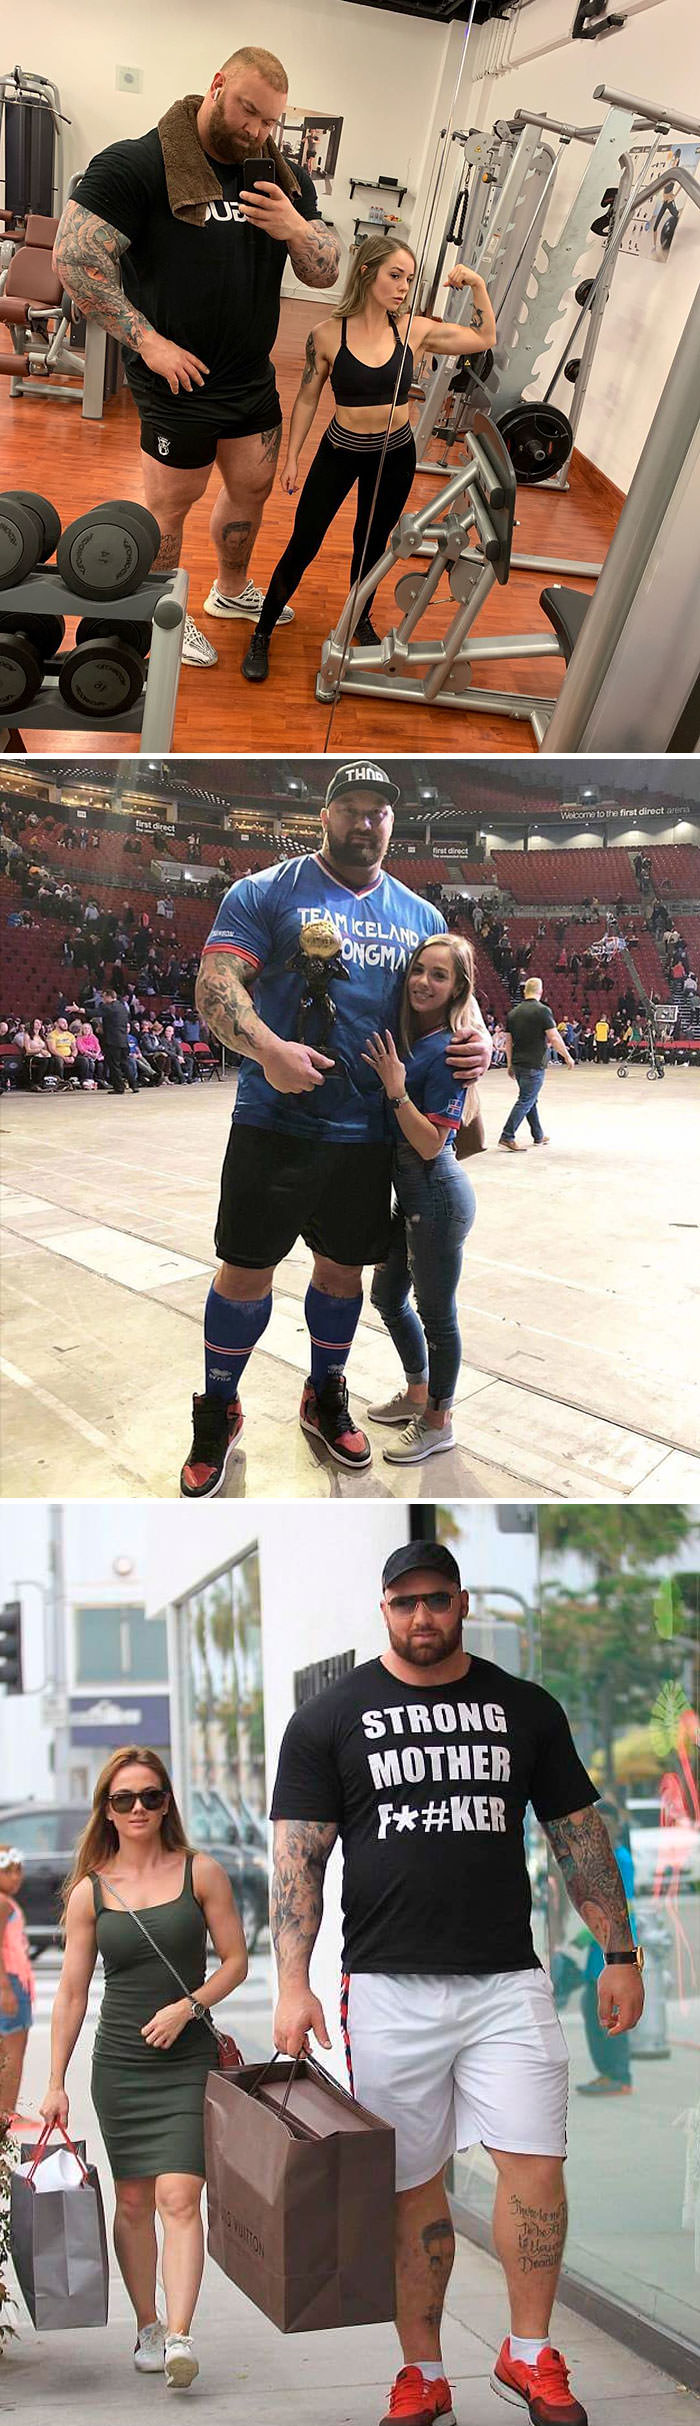 The Mountain from Game of Thrones with his wife.